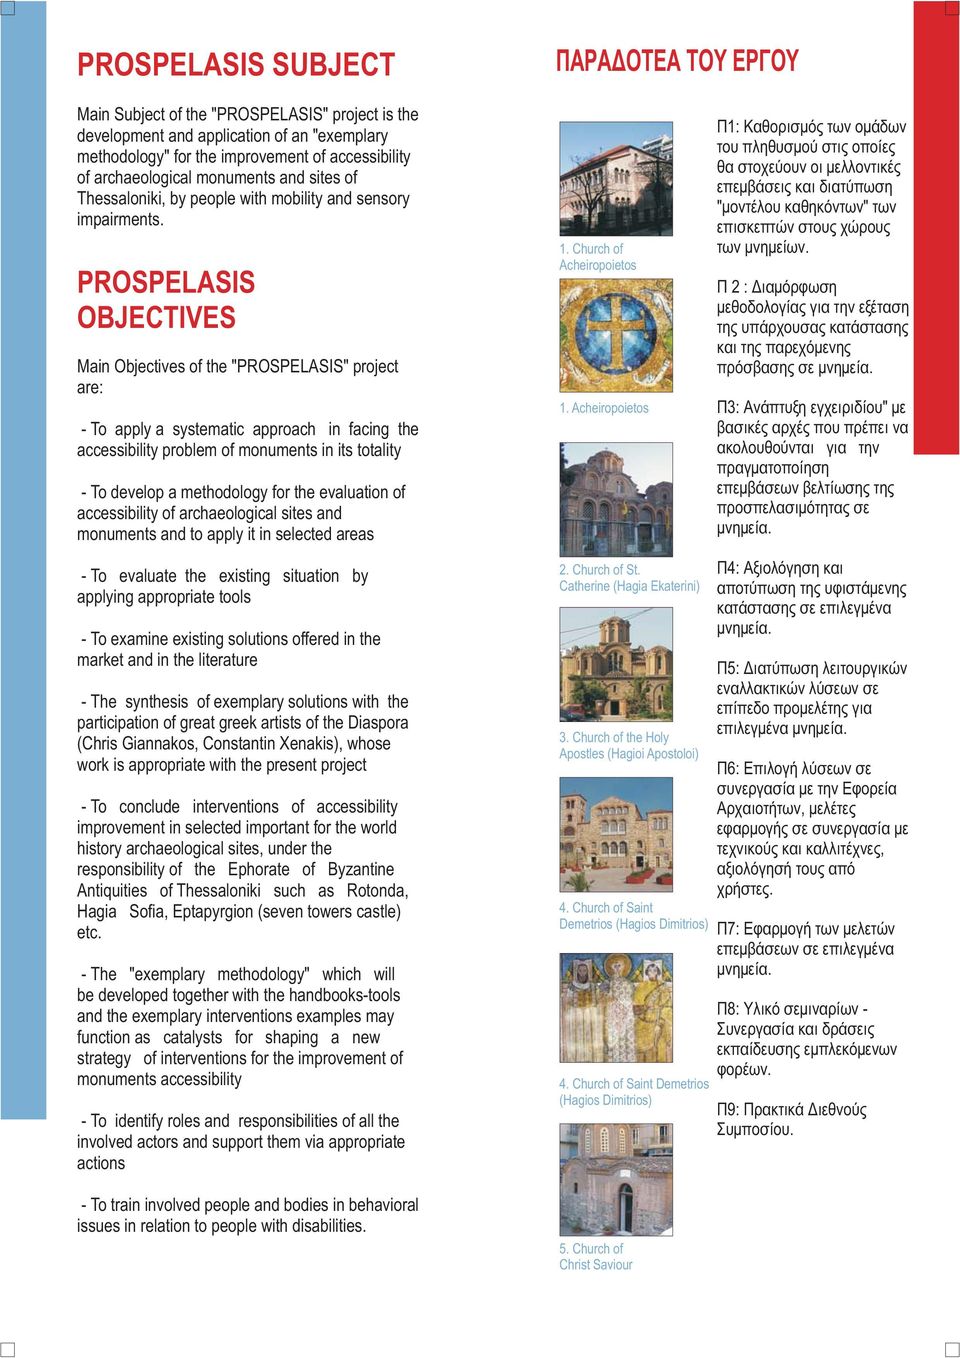 PROSPELASIS OBJECTIVES Main Objectives of the are: "P ROSPELASIS" project - To apply a systematic approach in facing the accessibility problem of monuments in its totality - To develop a methodology